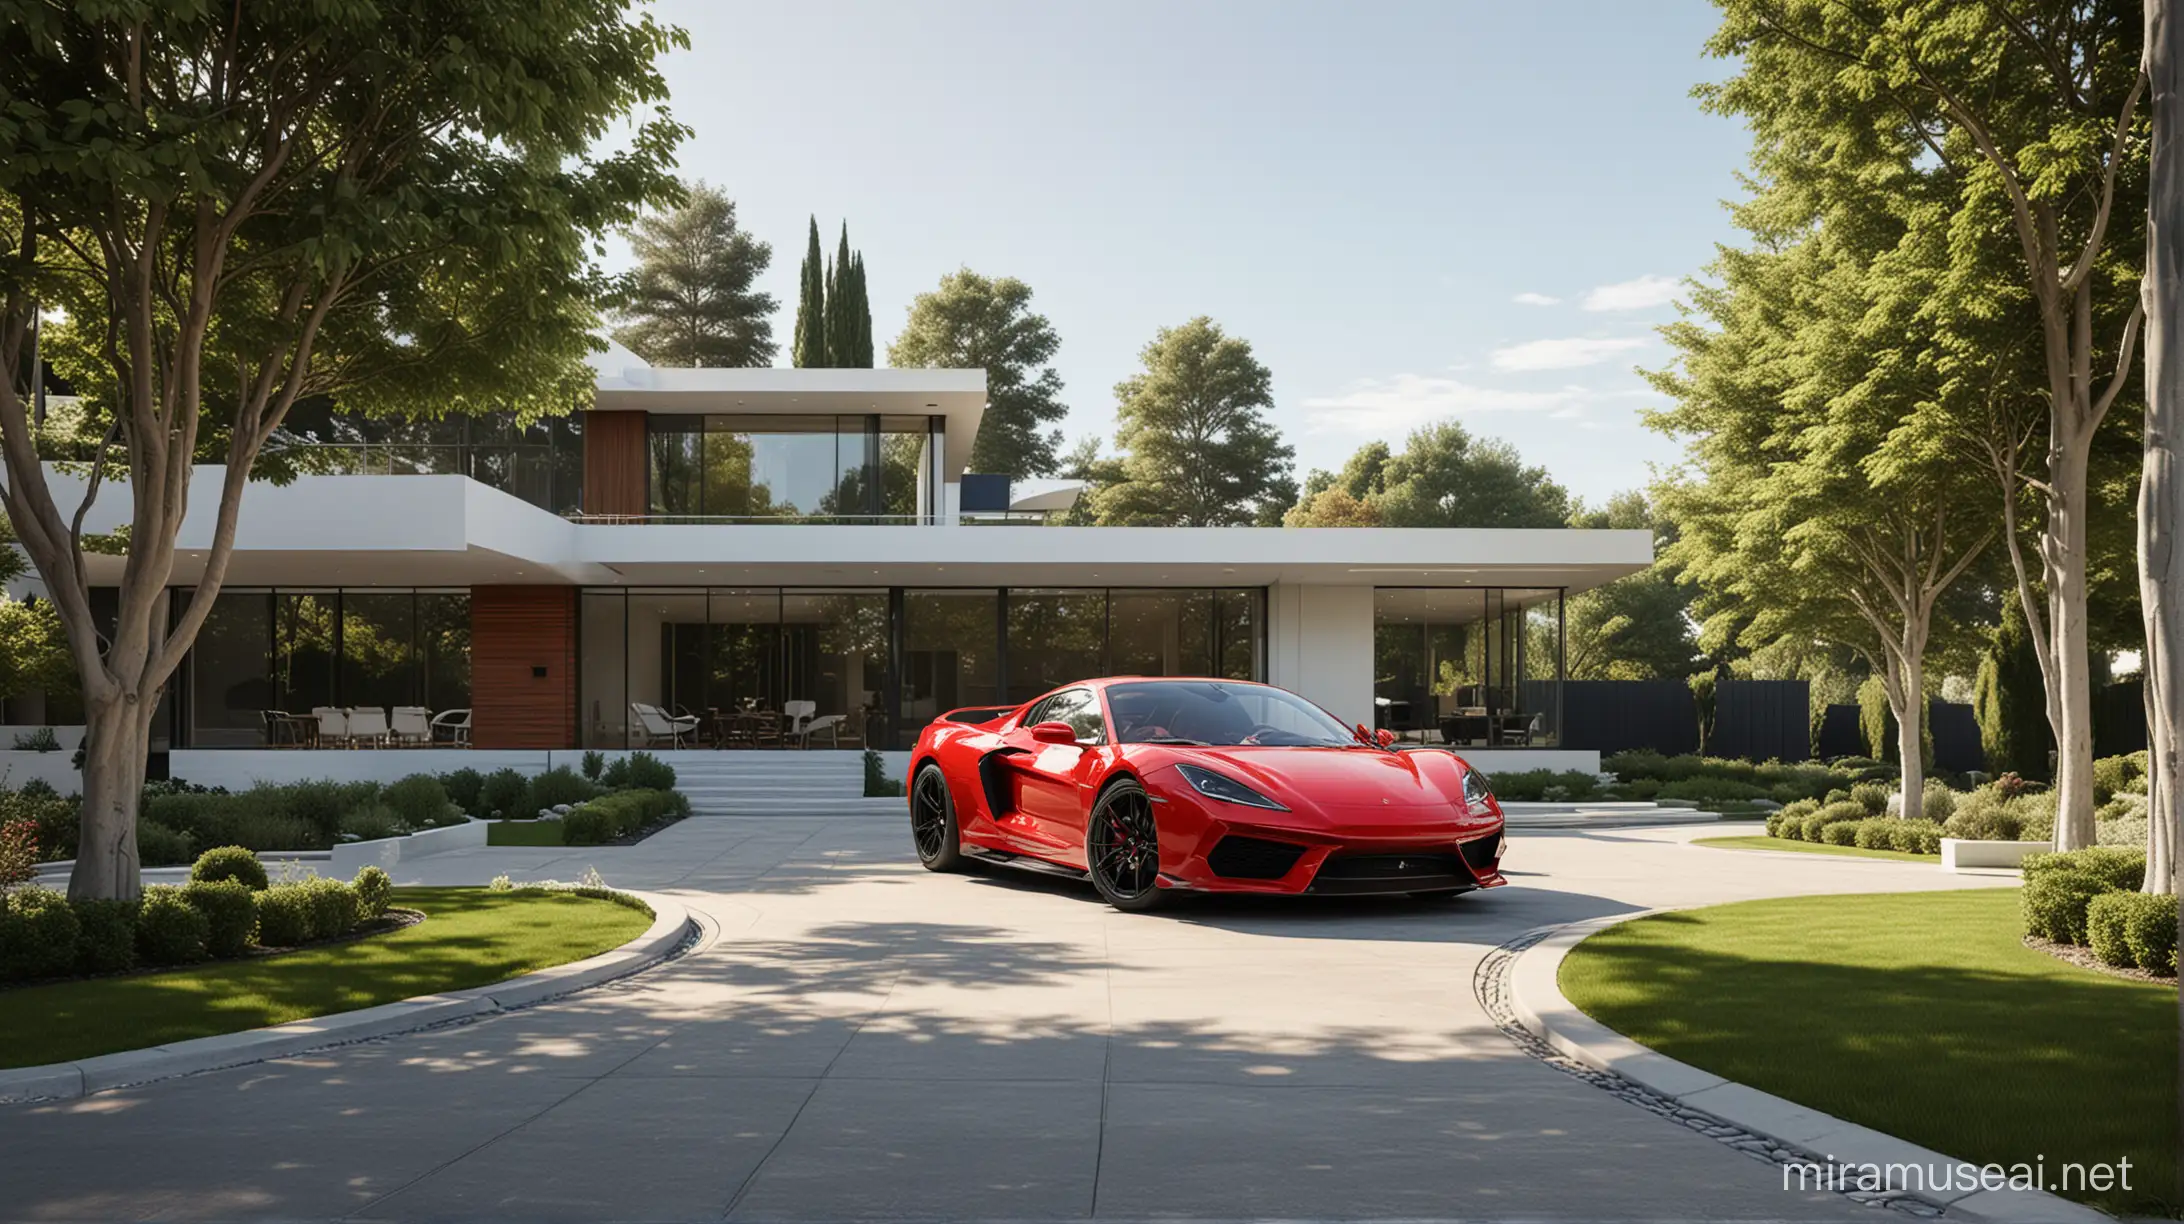 "Create a luxurious and modern scene that showcases a synergy between high-end architecture and automotive design. The setting is an affluent residential area with a contemporary house featuring large glass windows, minimalist design, and clean lines. The house should have a combination of materials such as wood paneling and white concrete, with a flat roof extending to create a cantilevered overhang.

In front of the house, place a sleek, high-performance sports car with a glossy finish to reflect its well-maintained condition. The car should have a low and wide stance, demonstrating its power and elegance, with distinctive red brake calipers visible through the wheel spokes.

The surrounding landscape should include manicured hedges, mature trees, and a well-kept lawn. A sculptural pathway leading to the residence adds to the luxurious feel of the environment. The lighting should be natural, indicating a bright sunny day with soft shadows to emphasize the volumes and materials of both the house and the car.

Lastly, ensure that the overall composition balances both the house and the car, with the vehicle placed at an angle that shows off its design while also drawing the viewer's gaze towards the home in the background."

For a more technical approach, you would use 3D modeling software to create the structures and the car, apply realistic textures and materials, and then render the scene using a powerful rendering engine to achieve photorealistic lighting and reflections. Post-processing might be necessary to enhance the final image's visual appeal.